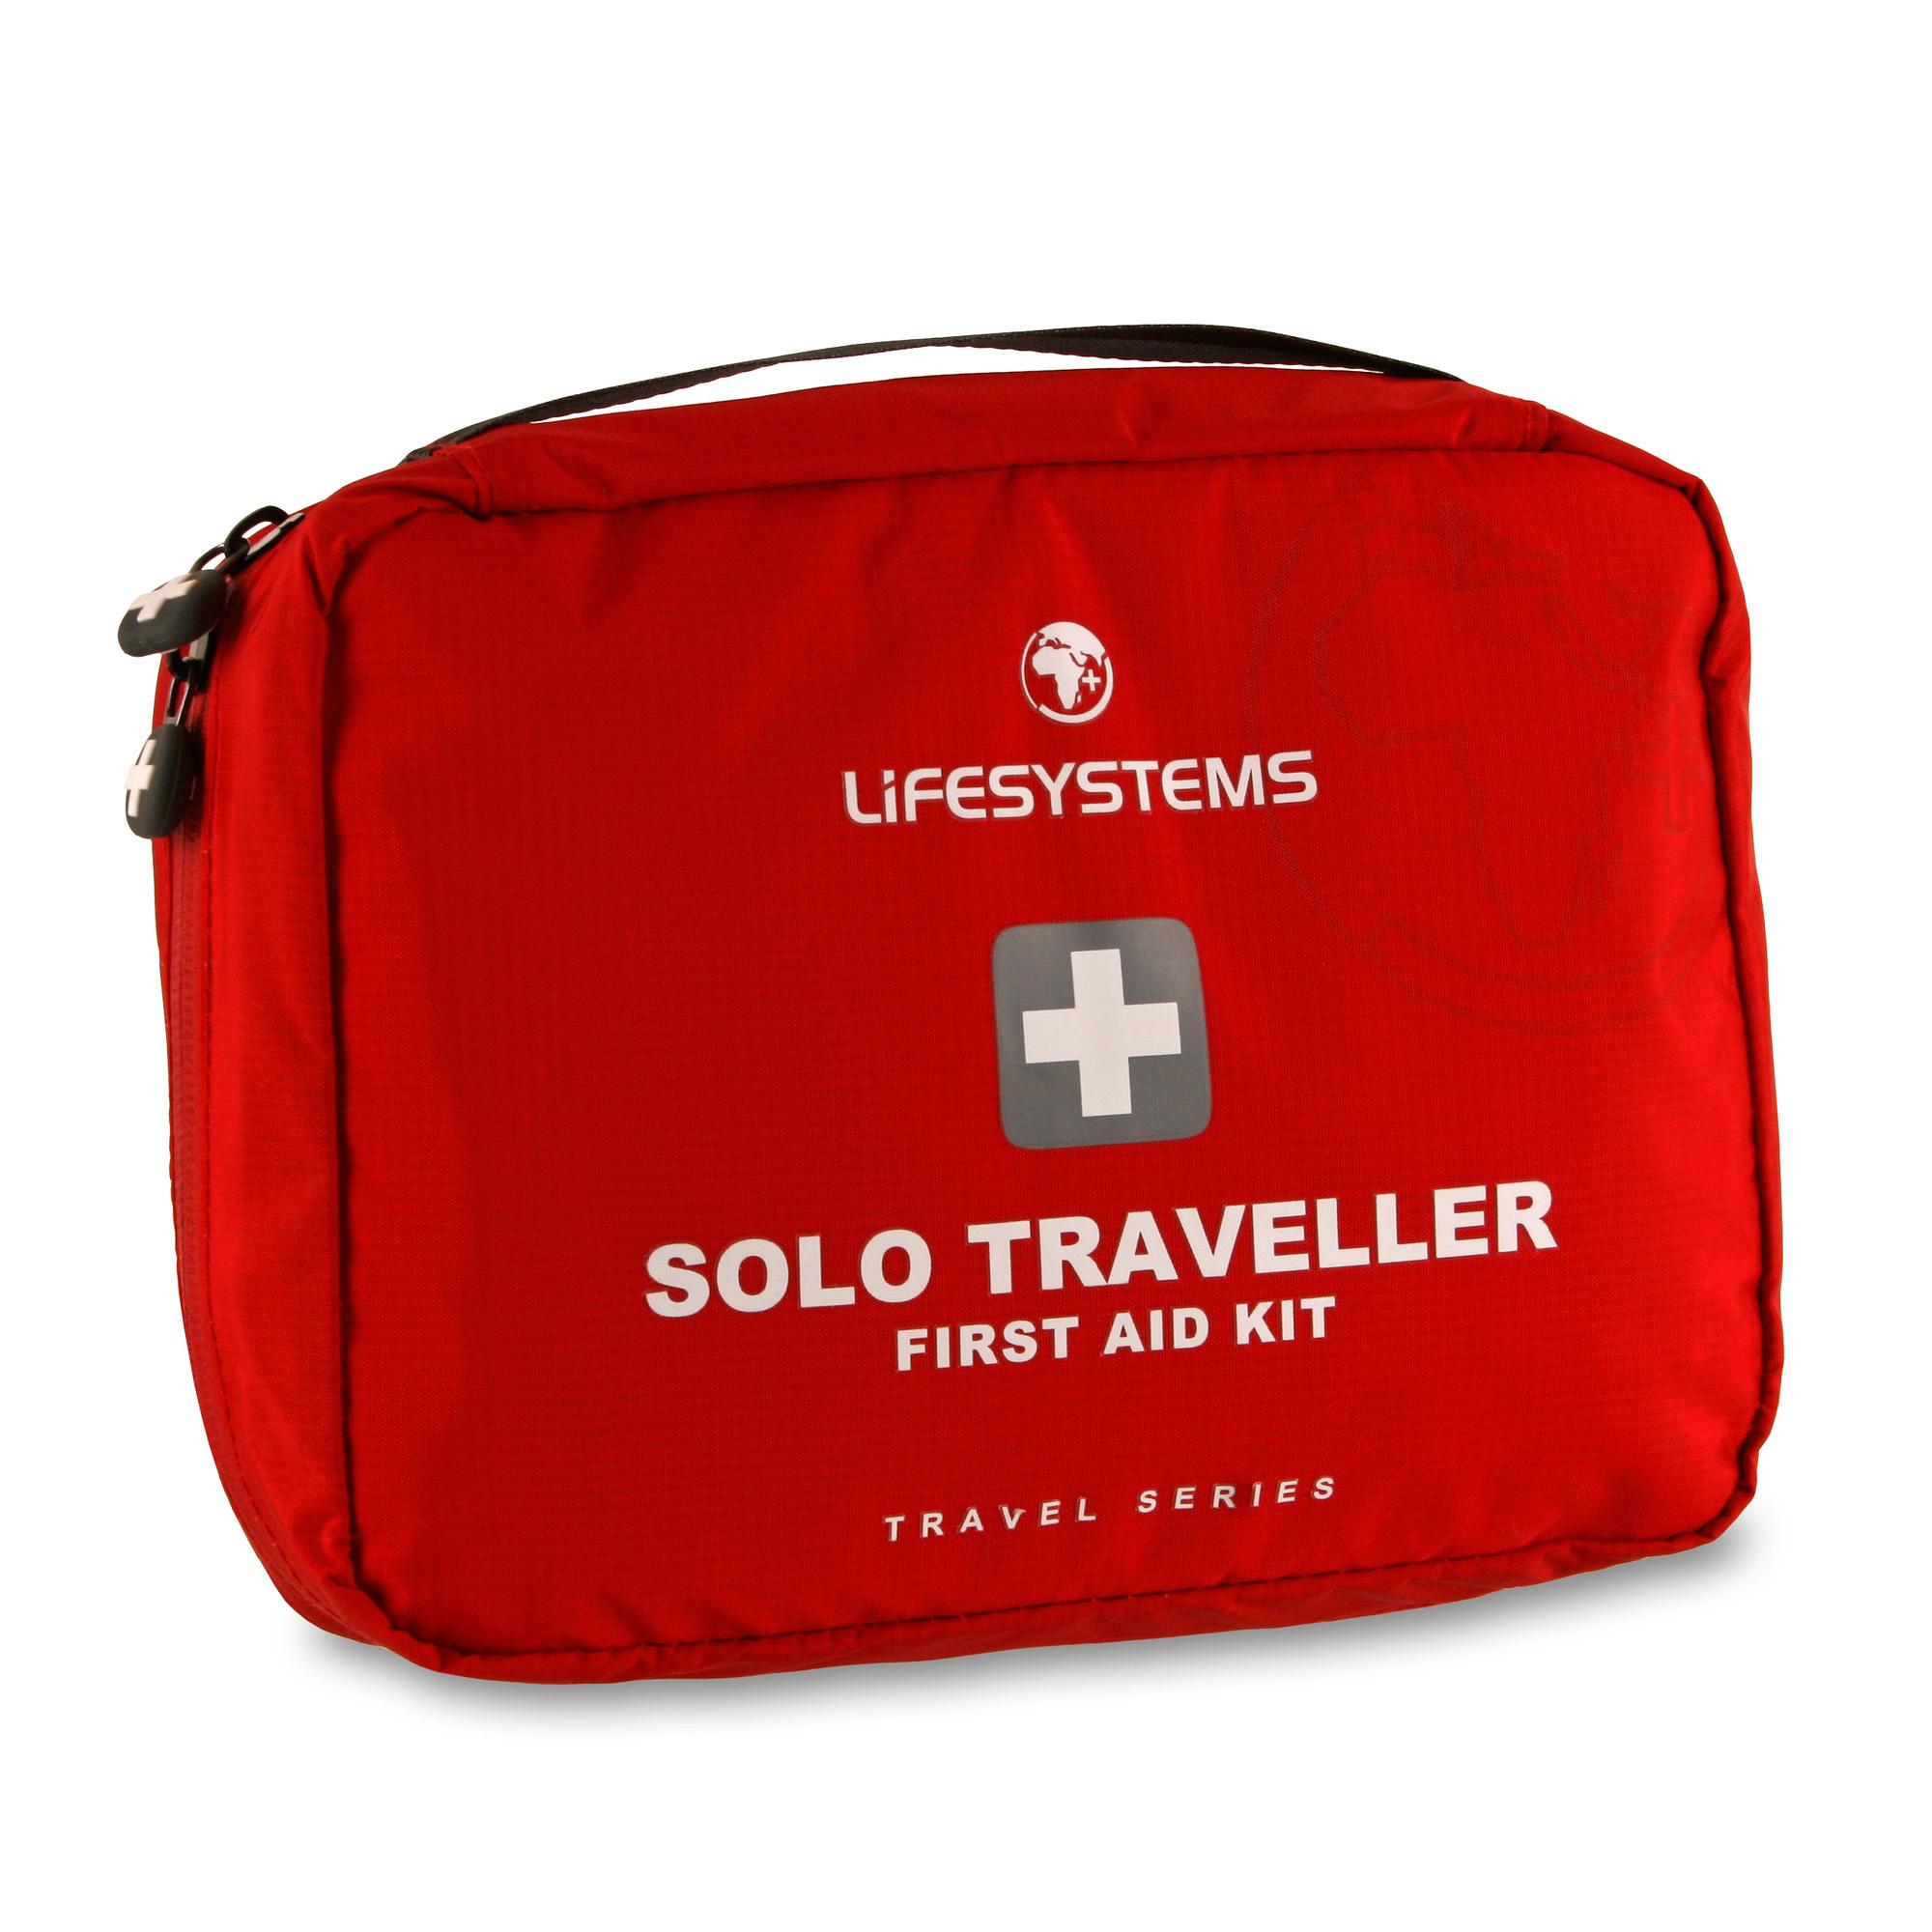 Lifesystems Solo Traveller First Aid Kit - Red  Red